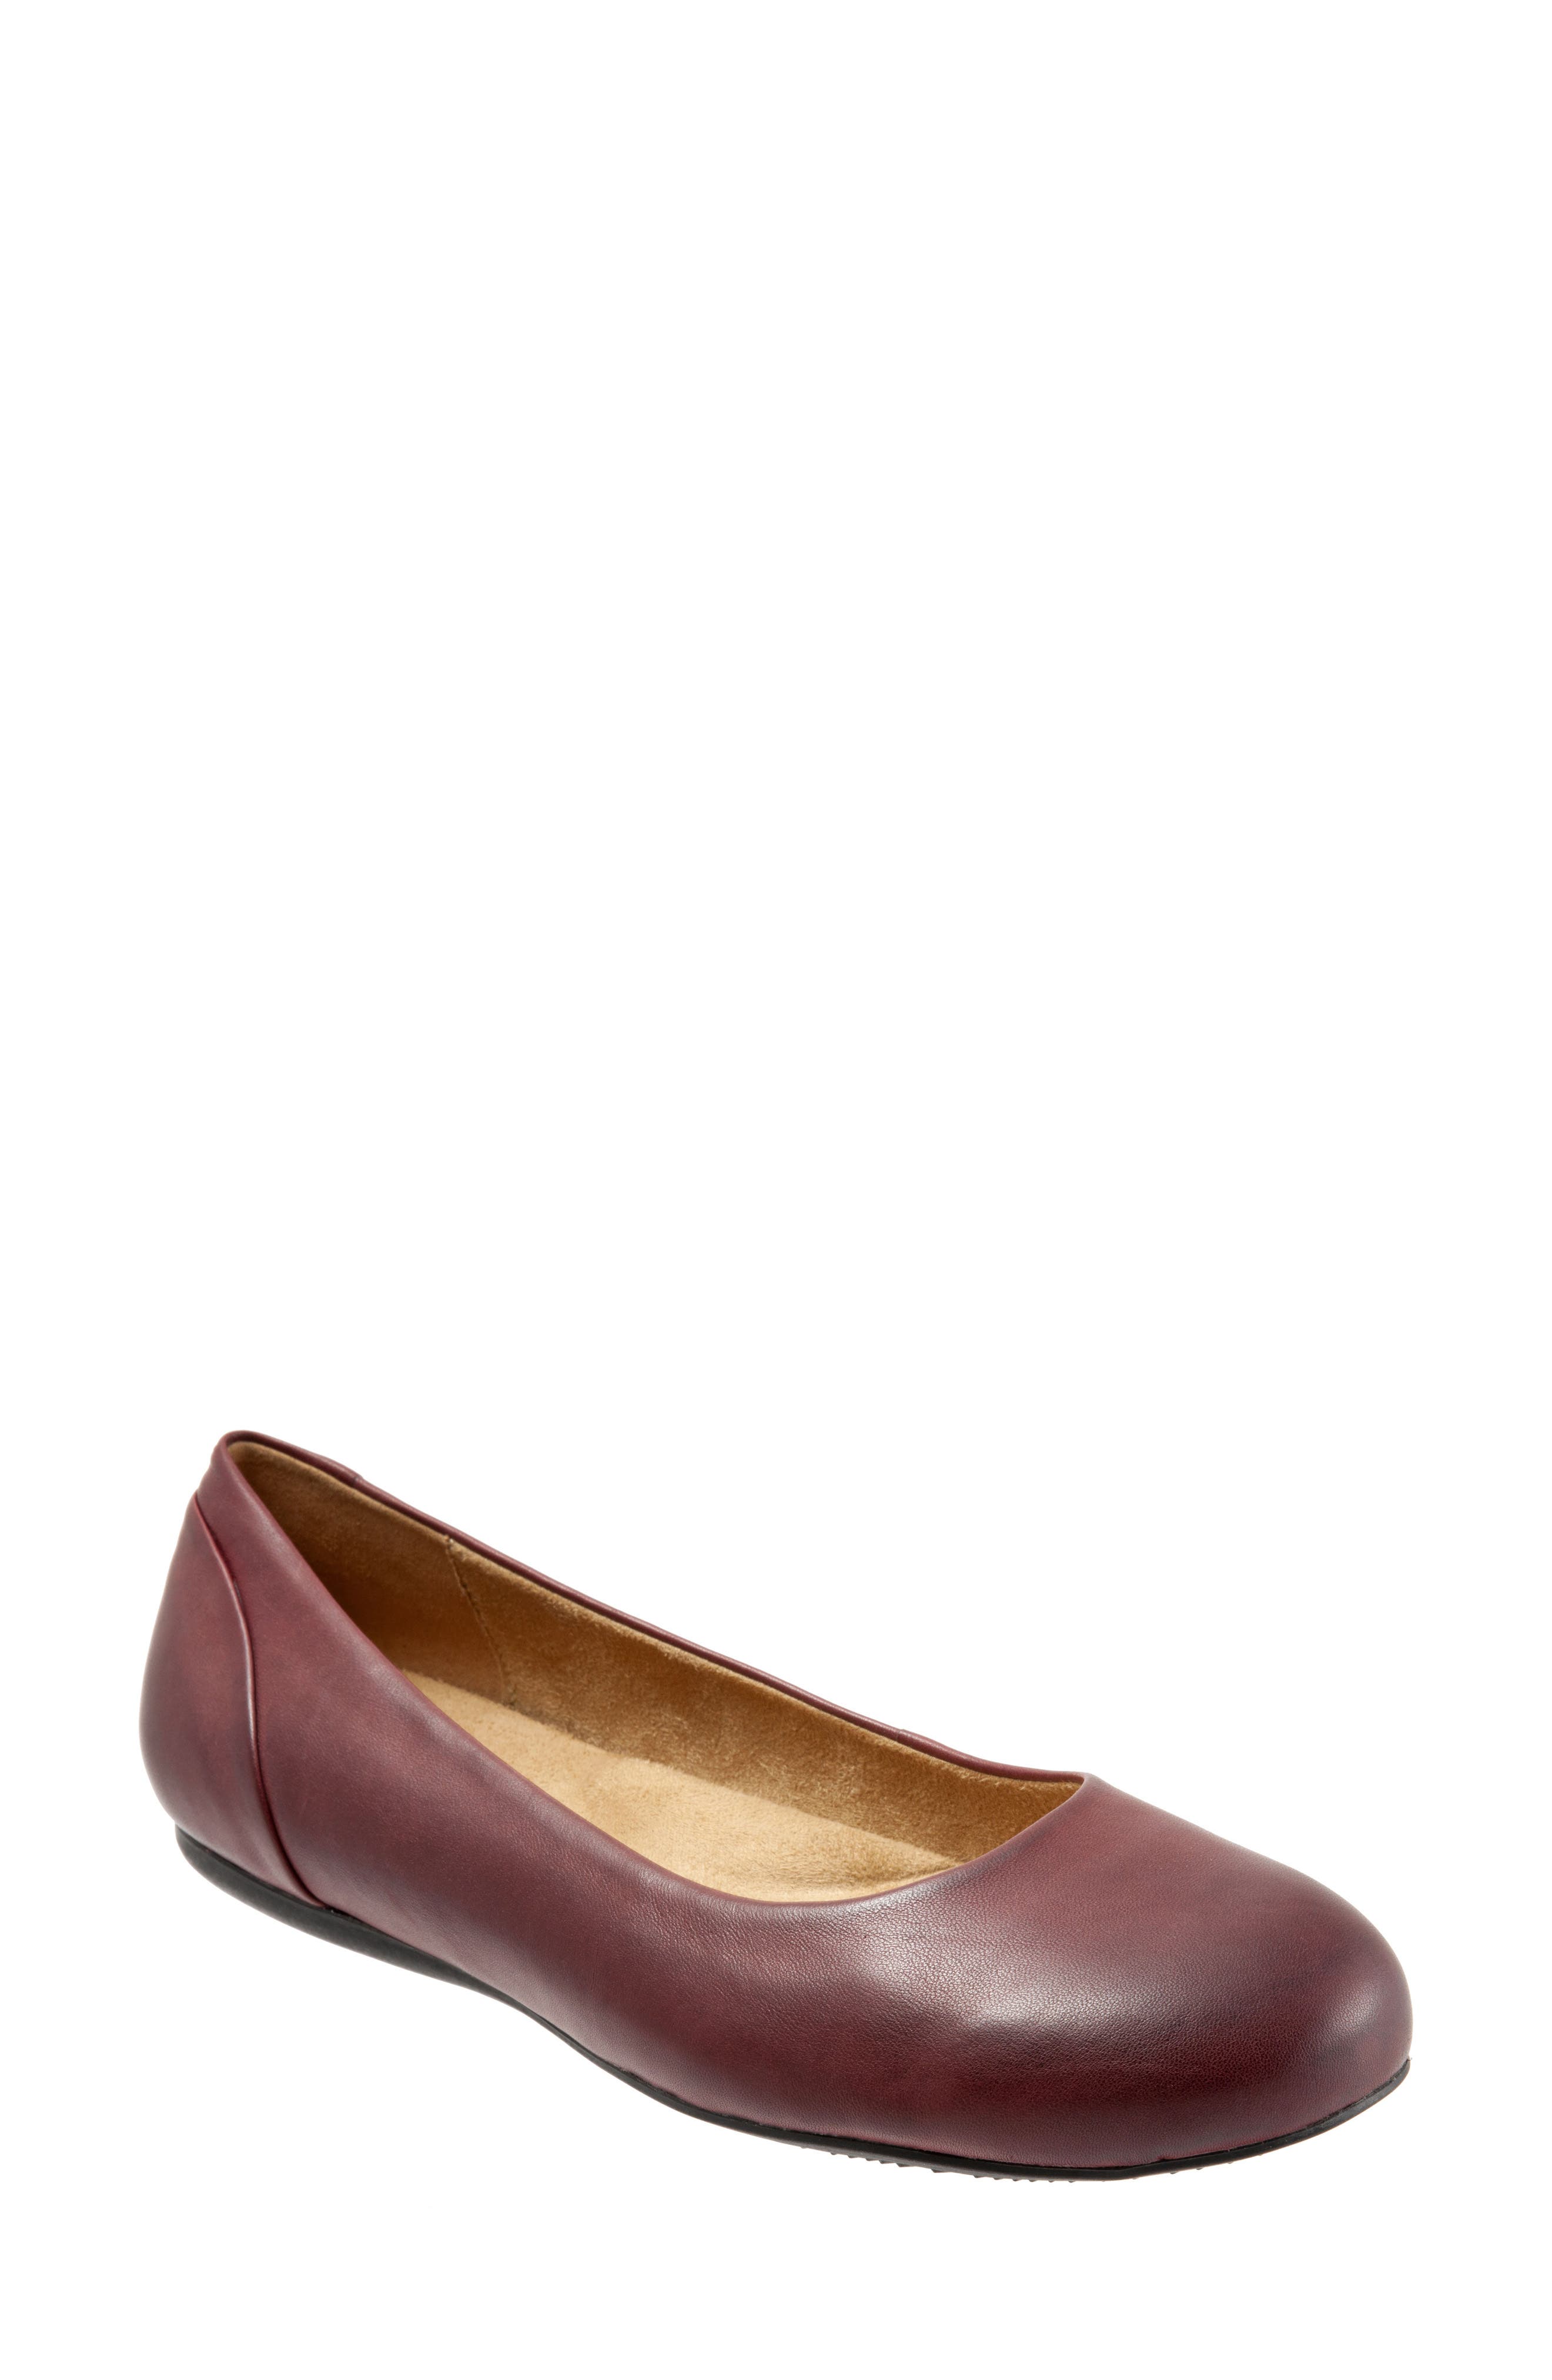 R9A Spot On F9R725 Ladies Shoes Black or Burgundy Shoes 